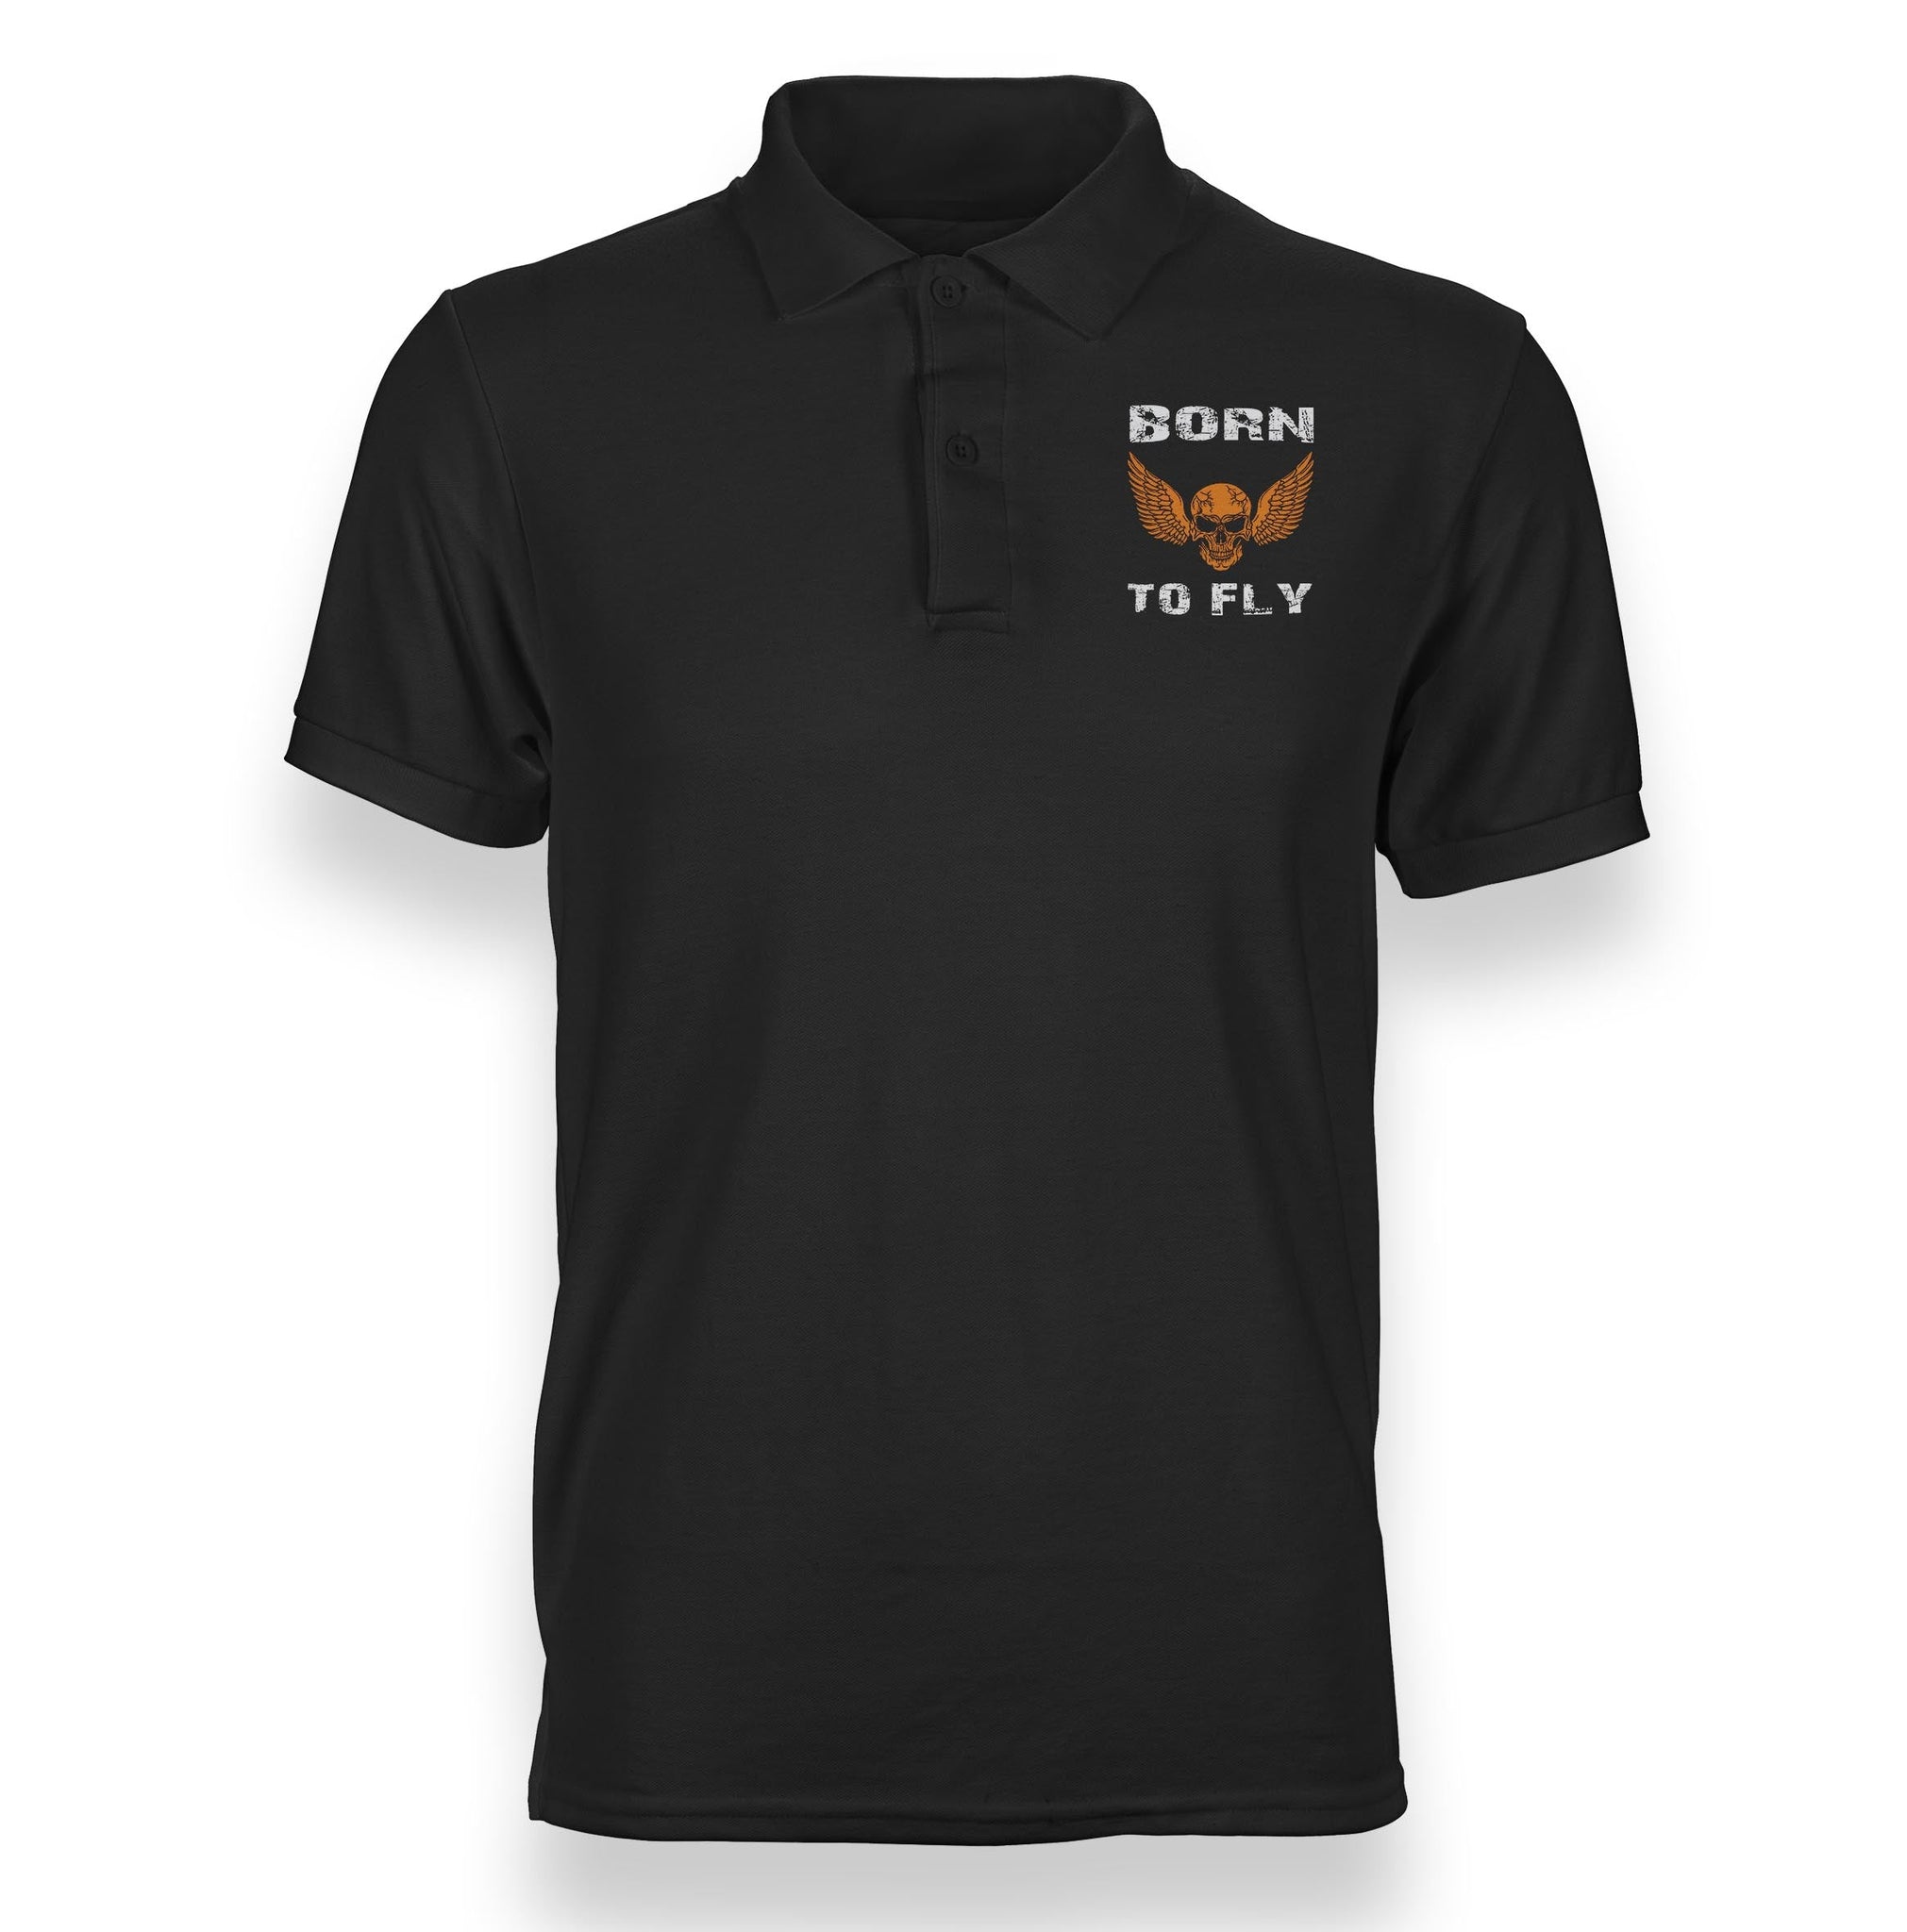 Born To Fly (Skeleton) Designed Polo T-Shirts